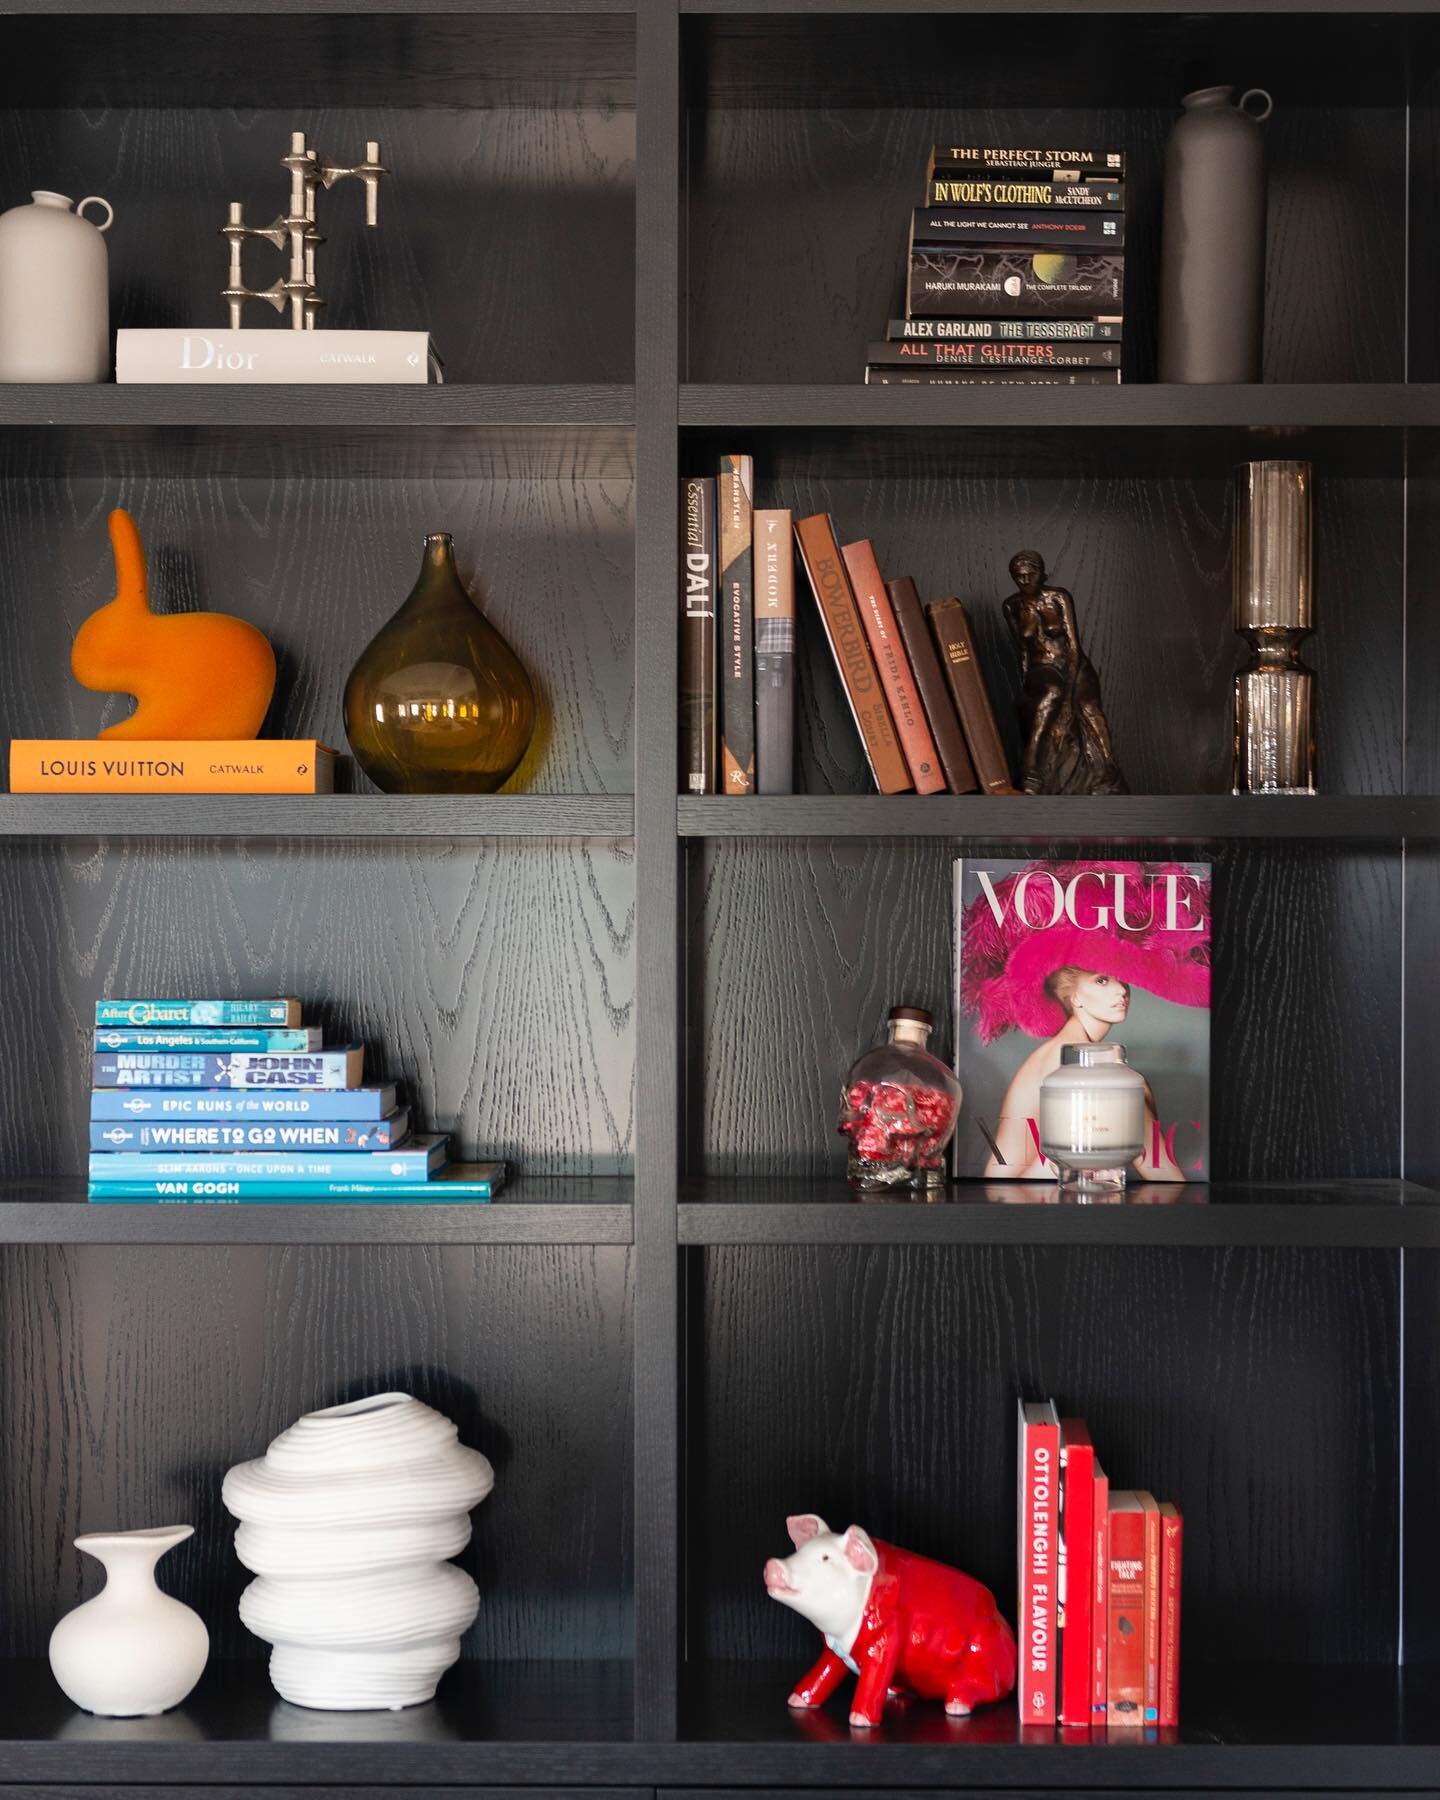 Colour blocked bookshelf compartments to create contrast against the black stained shelves⚡️